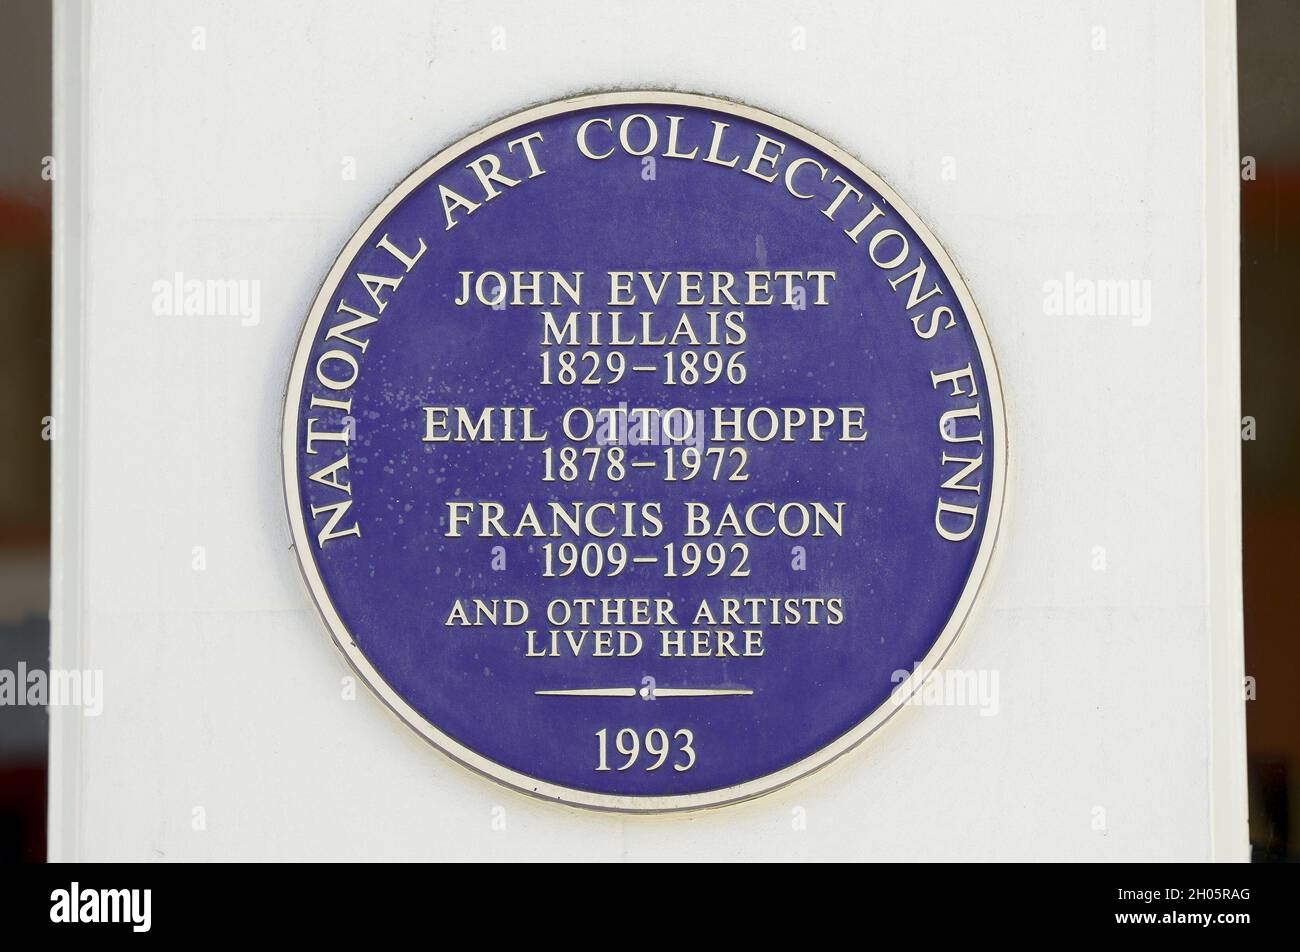 London, UK. Commemorative plaque: 'John Everett Millais 1829-1896, Emil Otto Hoppe 1878-1972, Francis Bacon 1909-1992 and other artists lived here' at Stock Photo